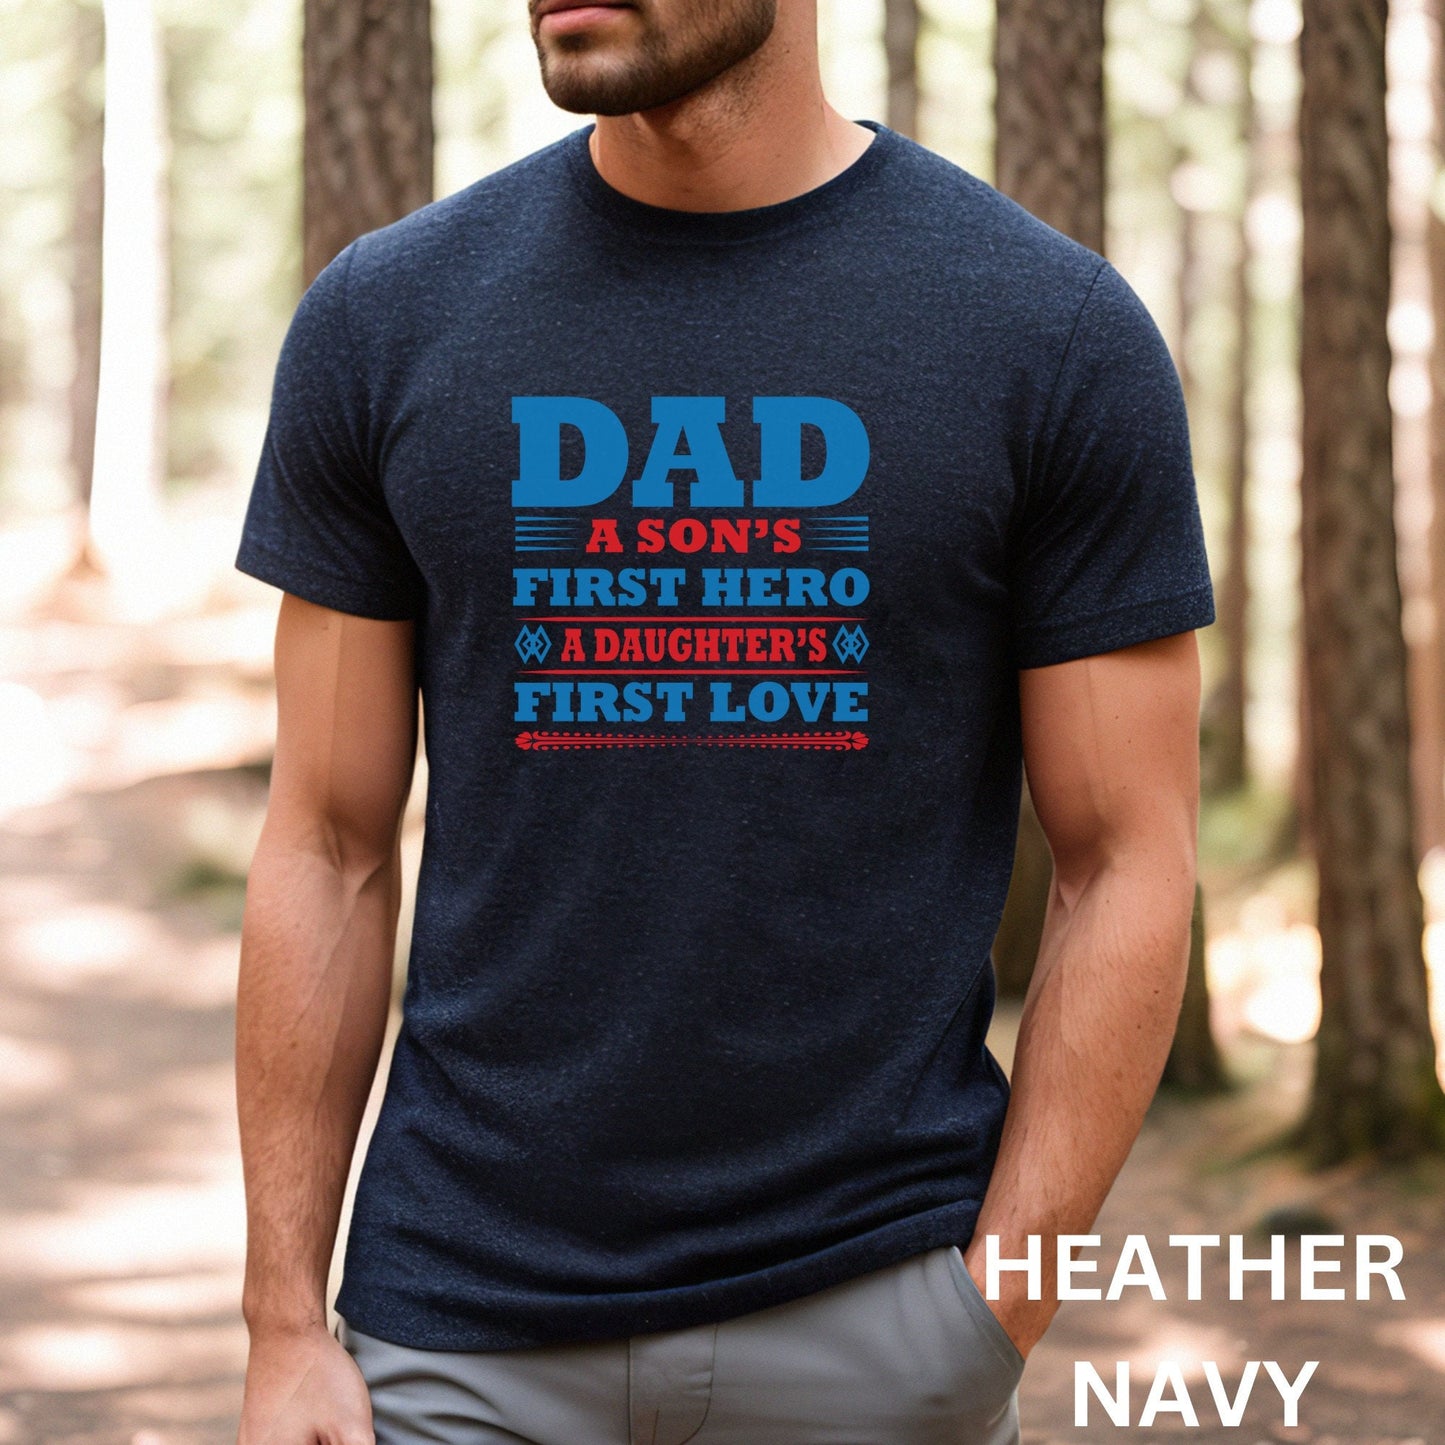 A Son's First Hero A Daughter's First Love Shirt, Father's Day Shirt, New Dad Shirt, Funny Dad Shirt, Gift For Husband, Cool Dad Shirt